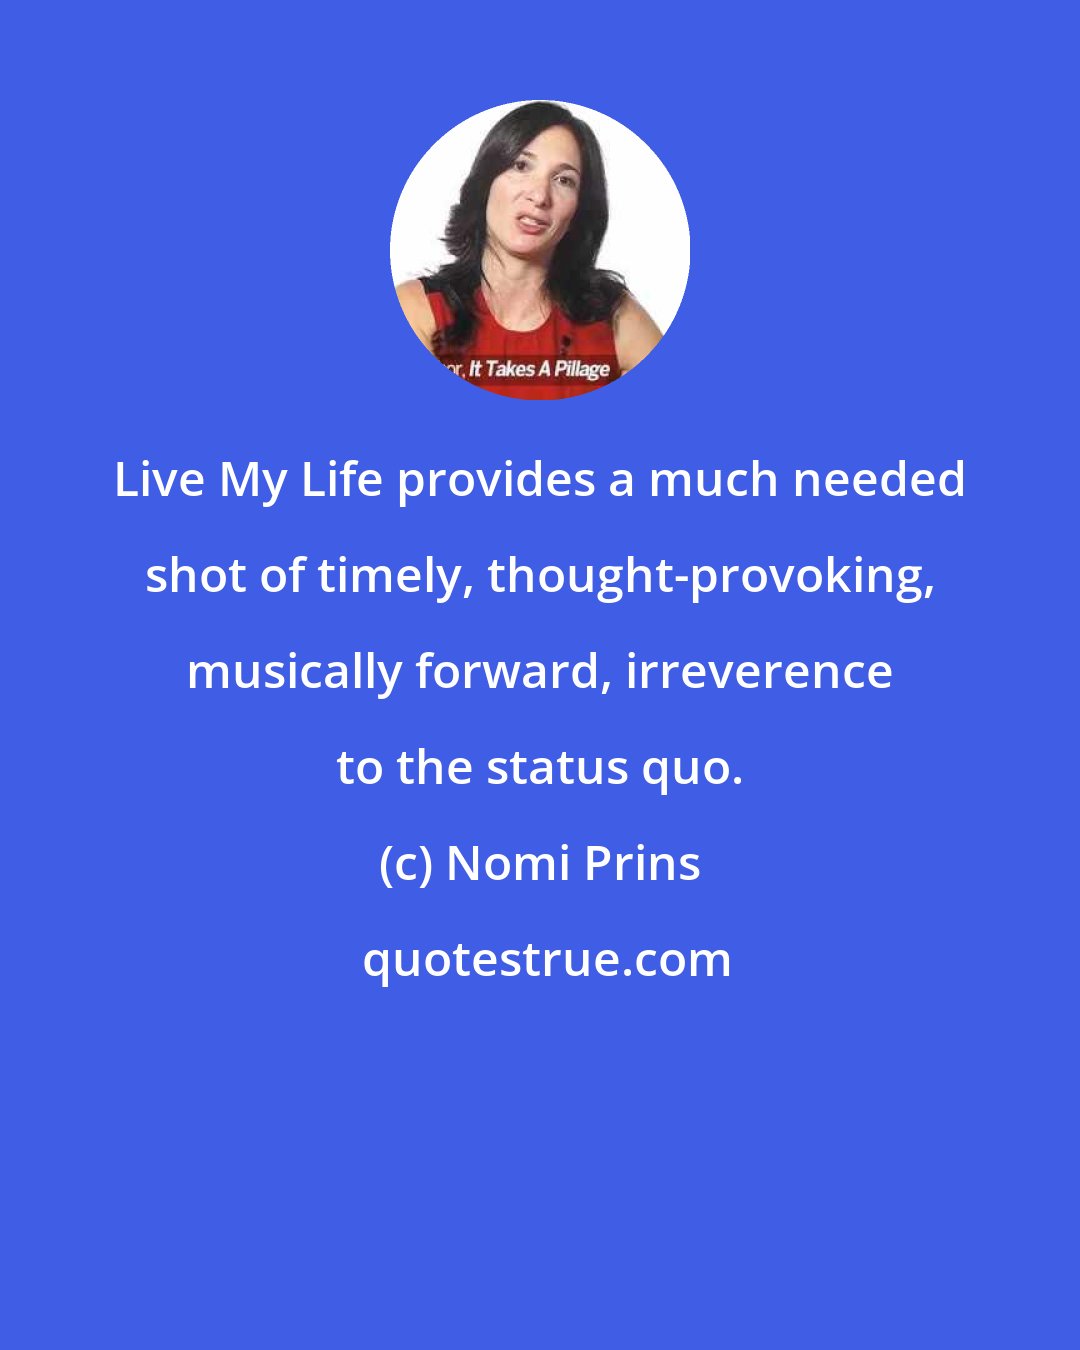 Nomi Prins: Live My Life provides a much needed shot of timely, thought-provoking, musically forward, irreverence to the status quo.